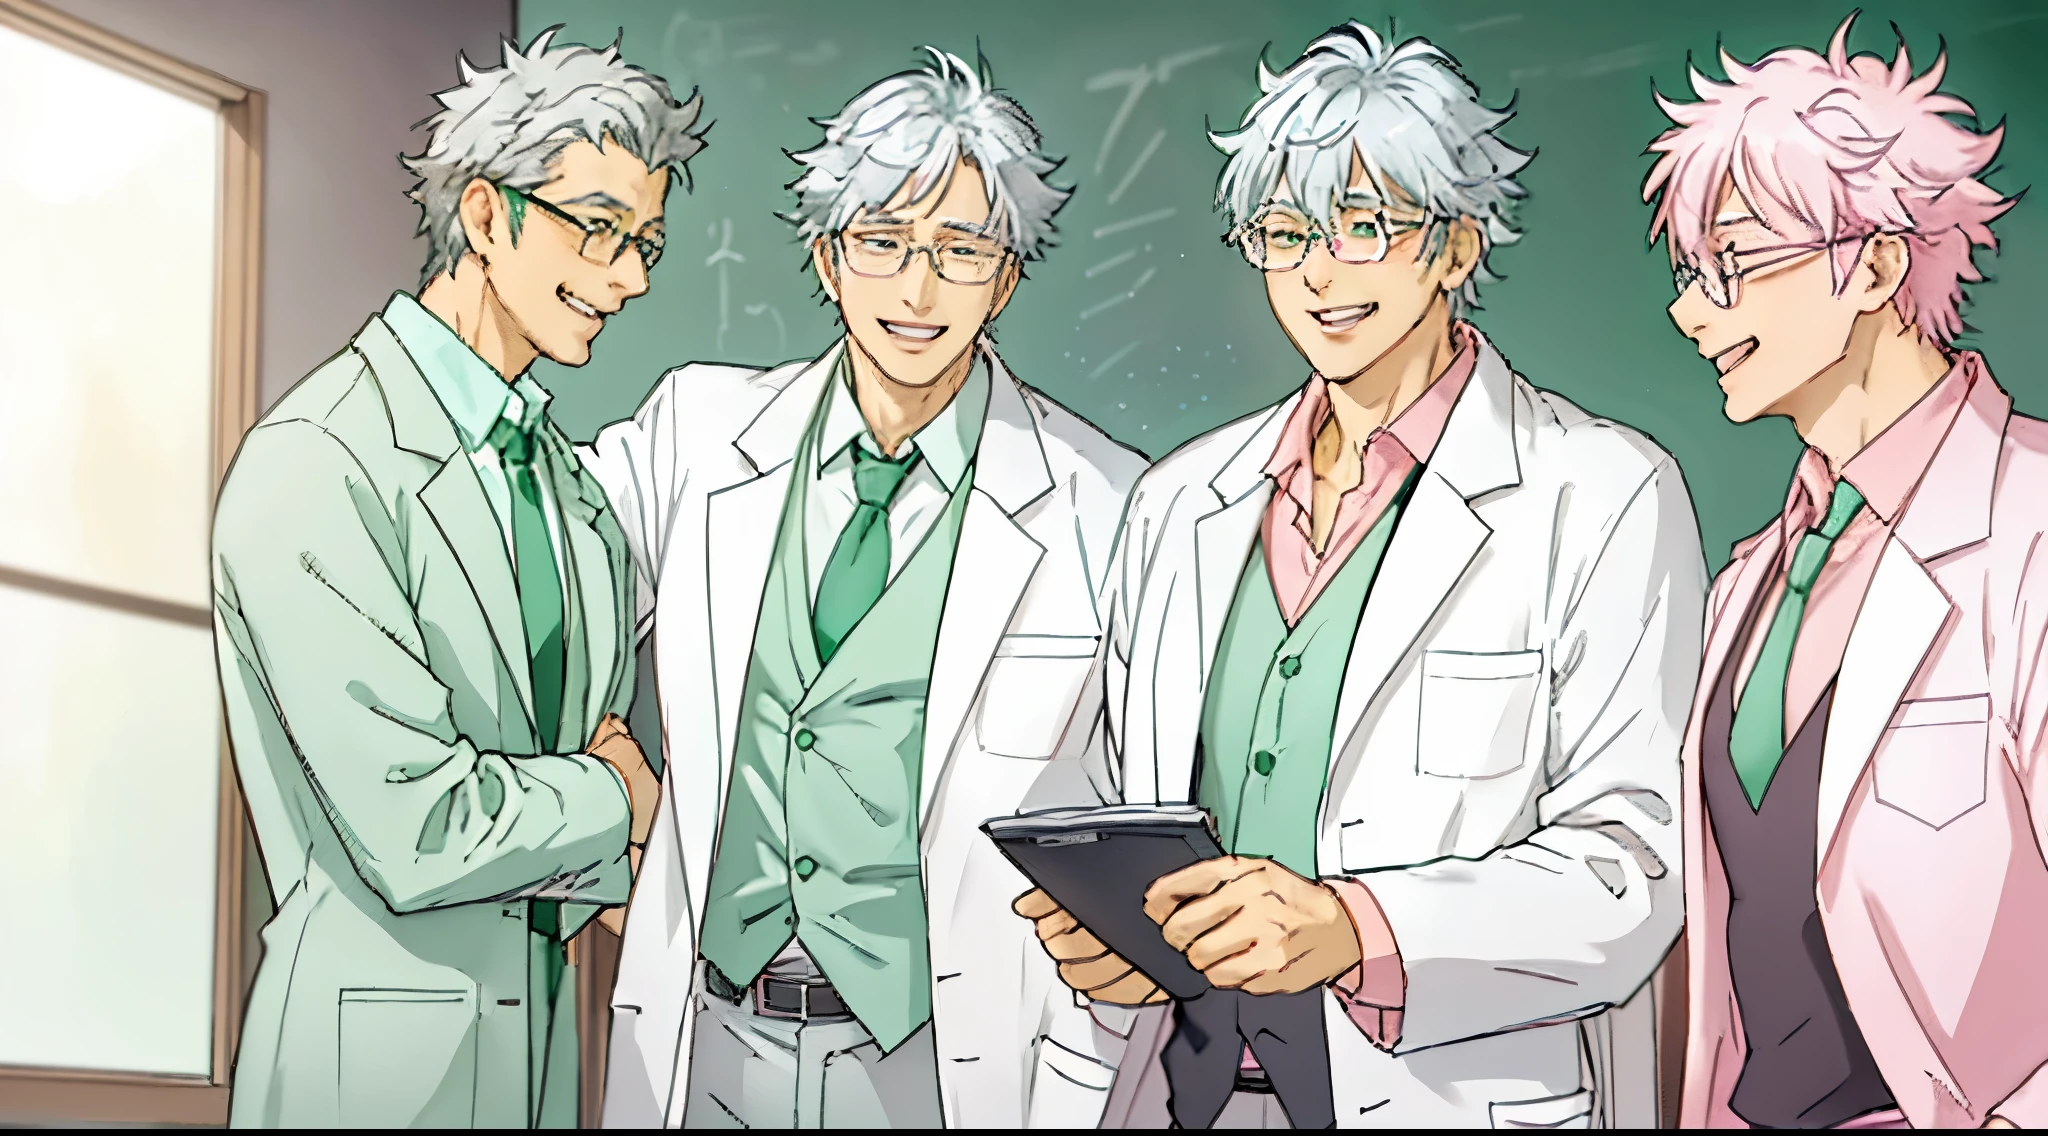 a teacher with a gray hair, he is wearing medical glasses, a lab coat, a green tie and a pink shirt, he is laughing hysterically,  his mouth wide open, his hand is placed on his chest as he laughed